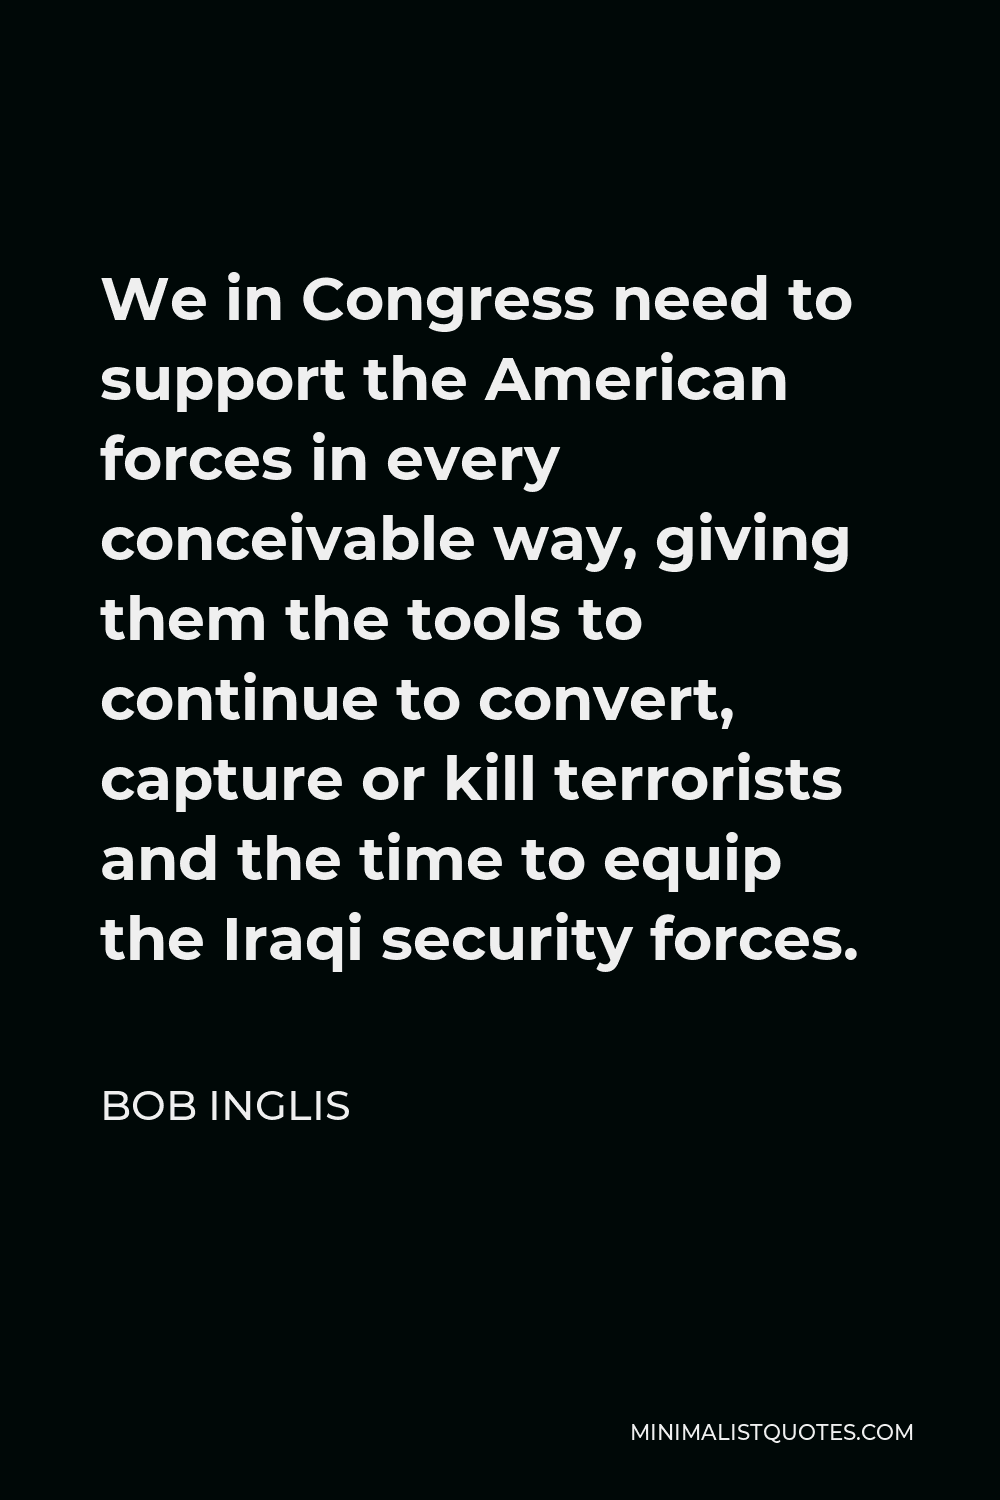 Bob Inglis Quote - We in Congress need to support the American forces in every conceivable way, giving them the tools to continue to convert, capture or kill terrorists and the time to equip the Iraqi security forces.